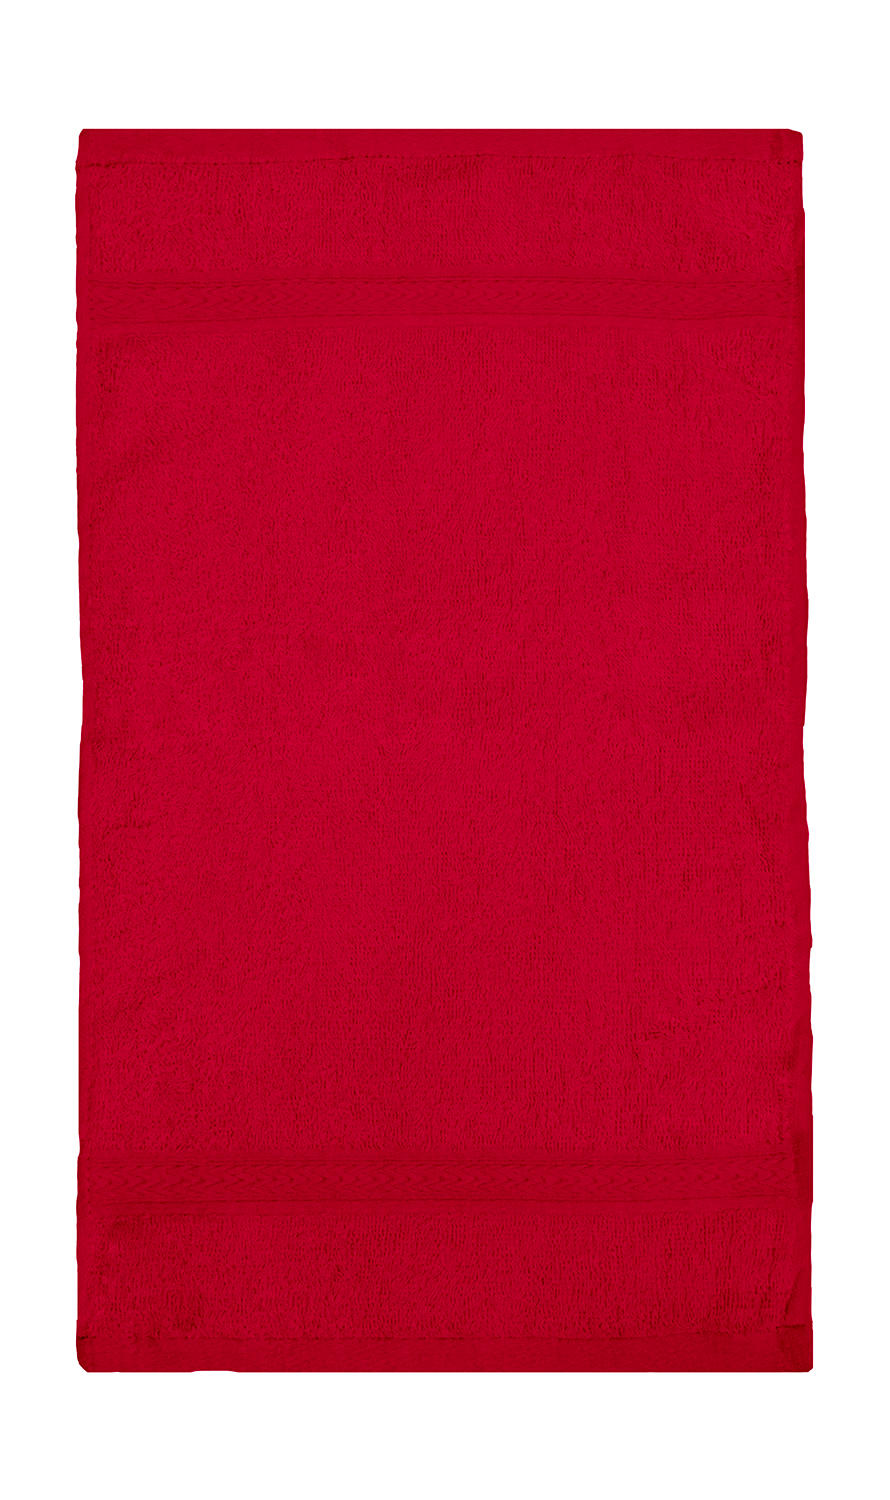  Rhine Guest Towel 30x50 cm in Farbe Red